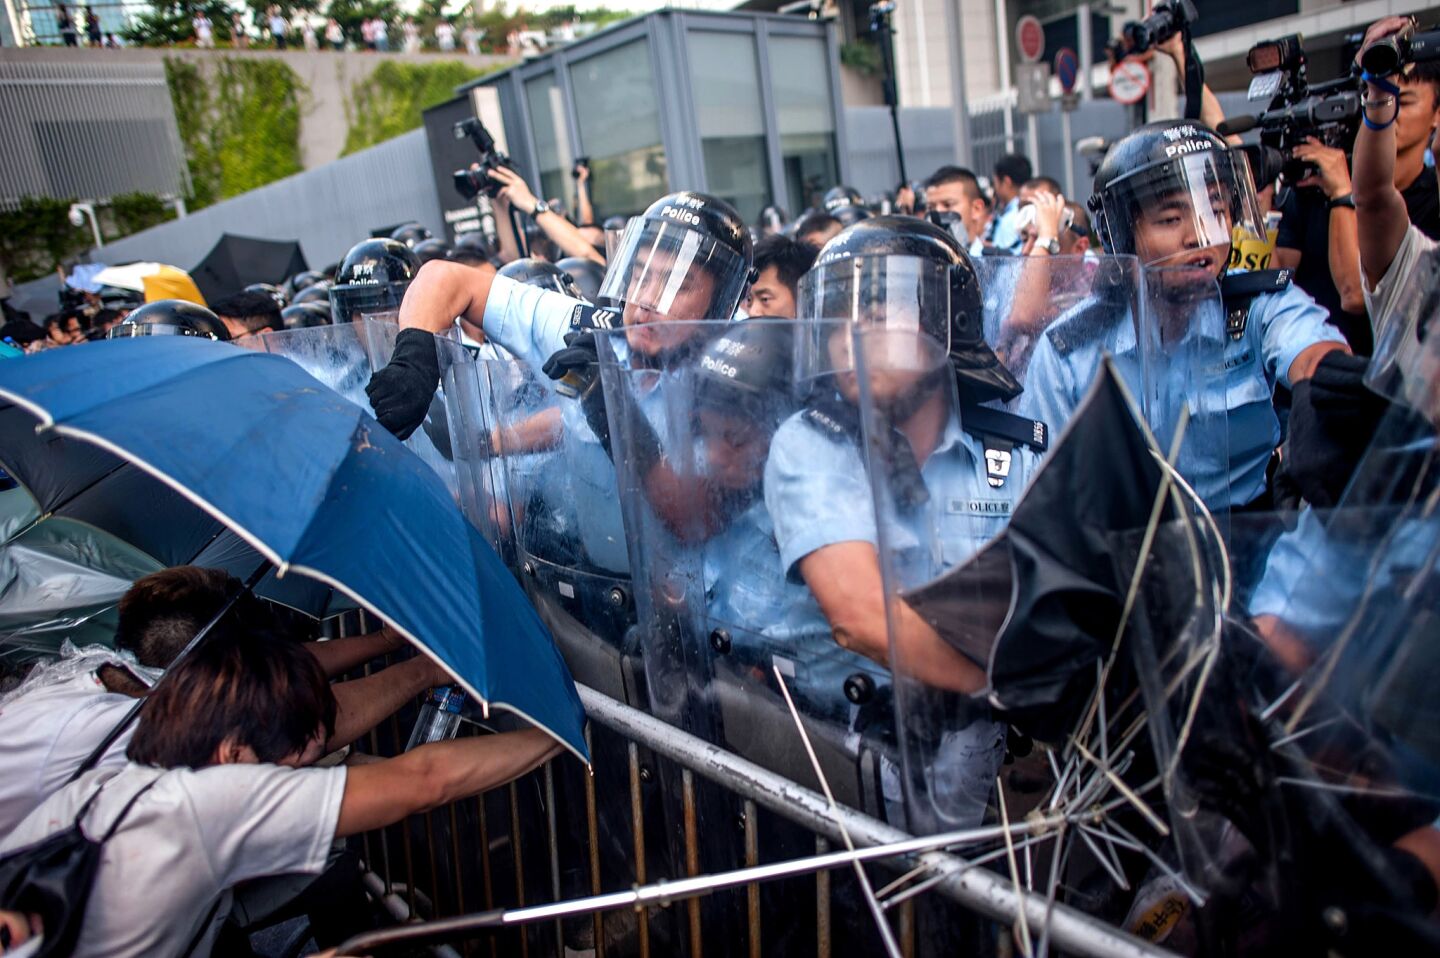 Police officers reacts outside a government complex in Hong Kong, as thousands of students started a week-long boycott of classes in protest against Beijing's conservative framework for political reform in Hong Kong.